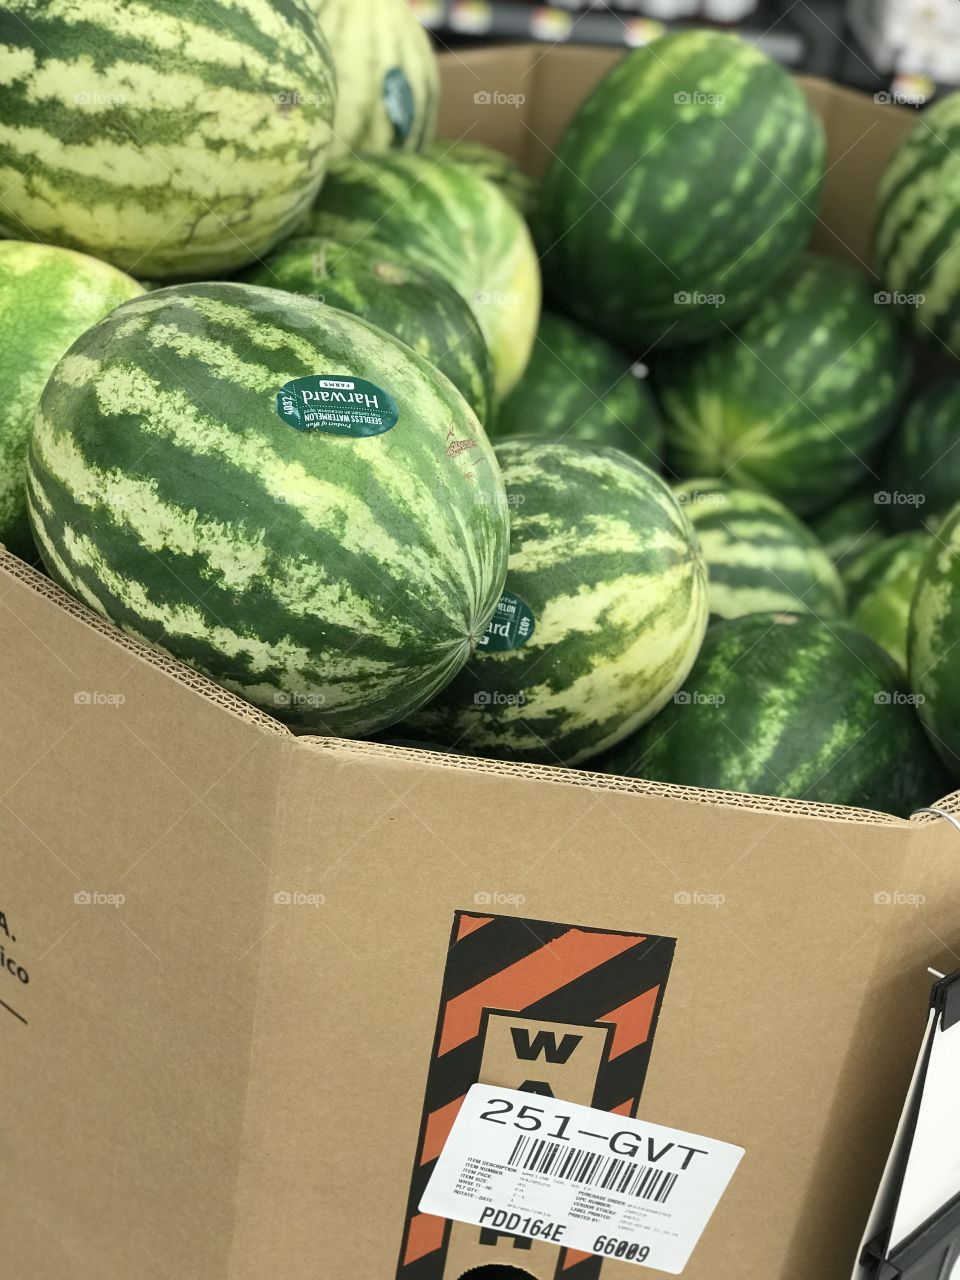 Wonderful watermelons at a store:)